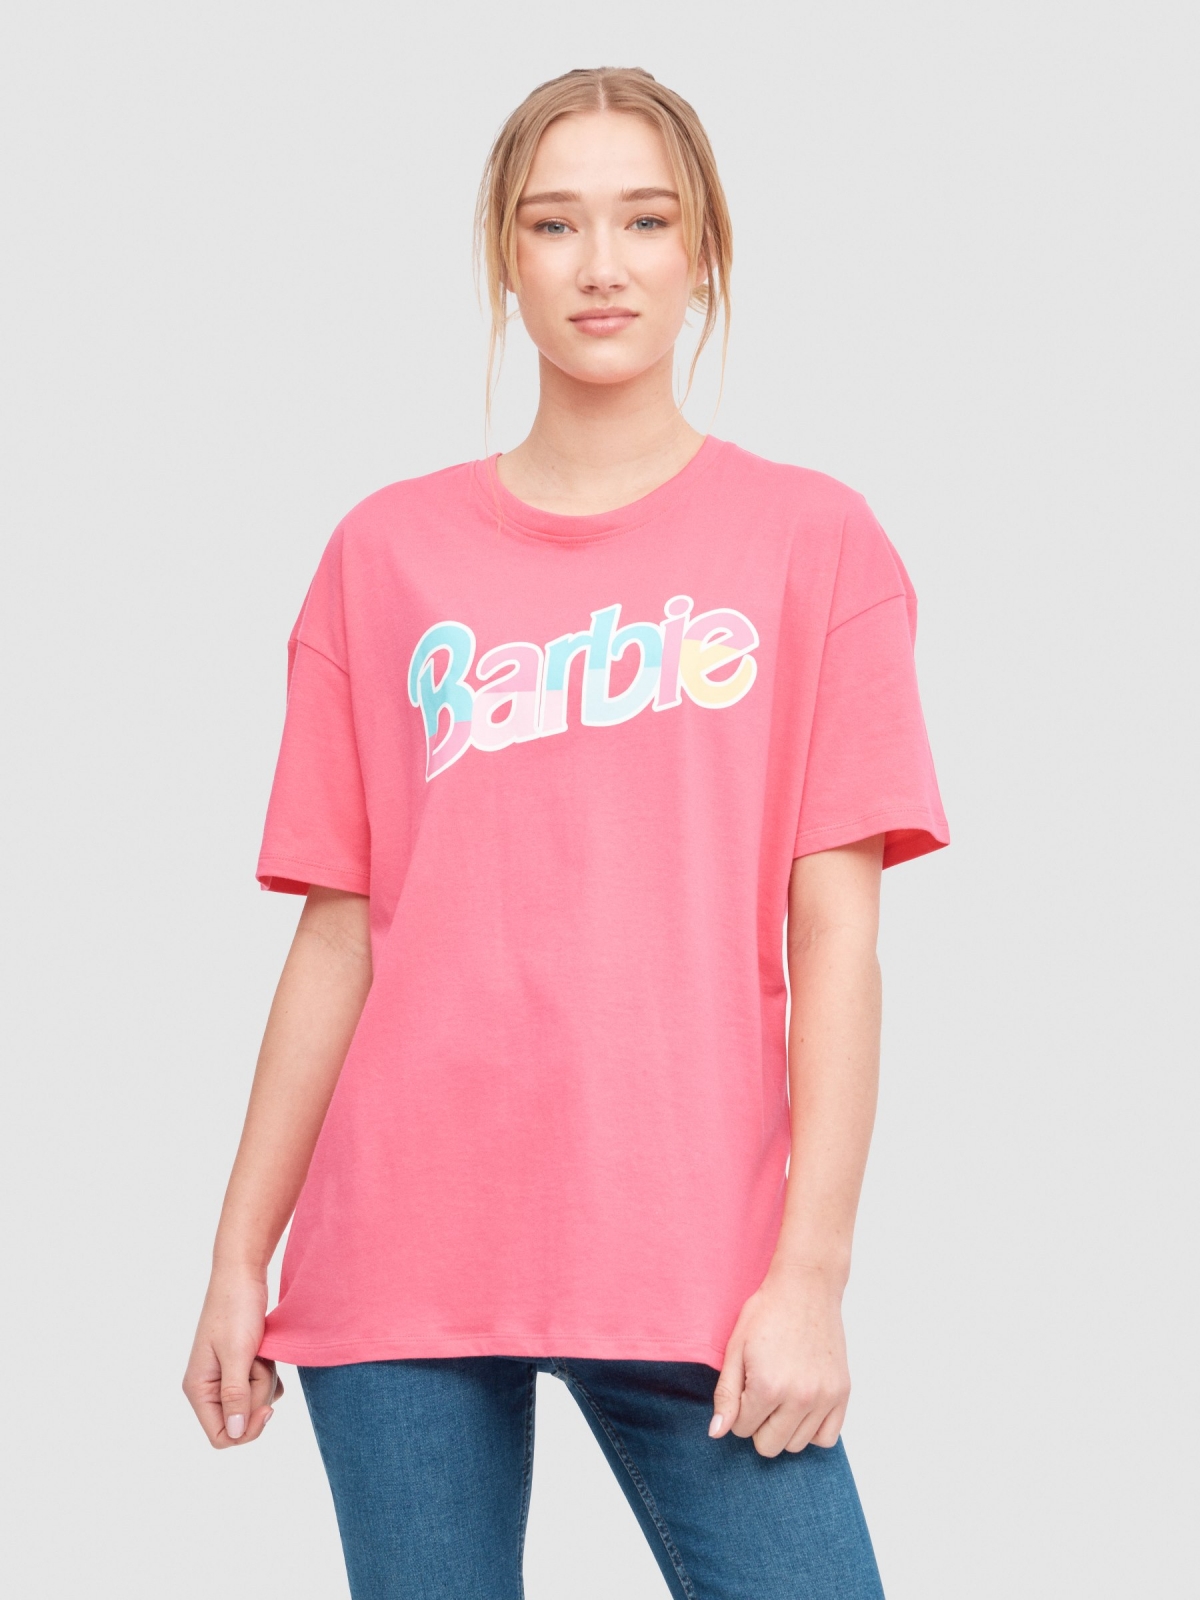 Barbie oversize t-shirt pink middle front view